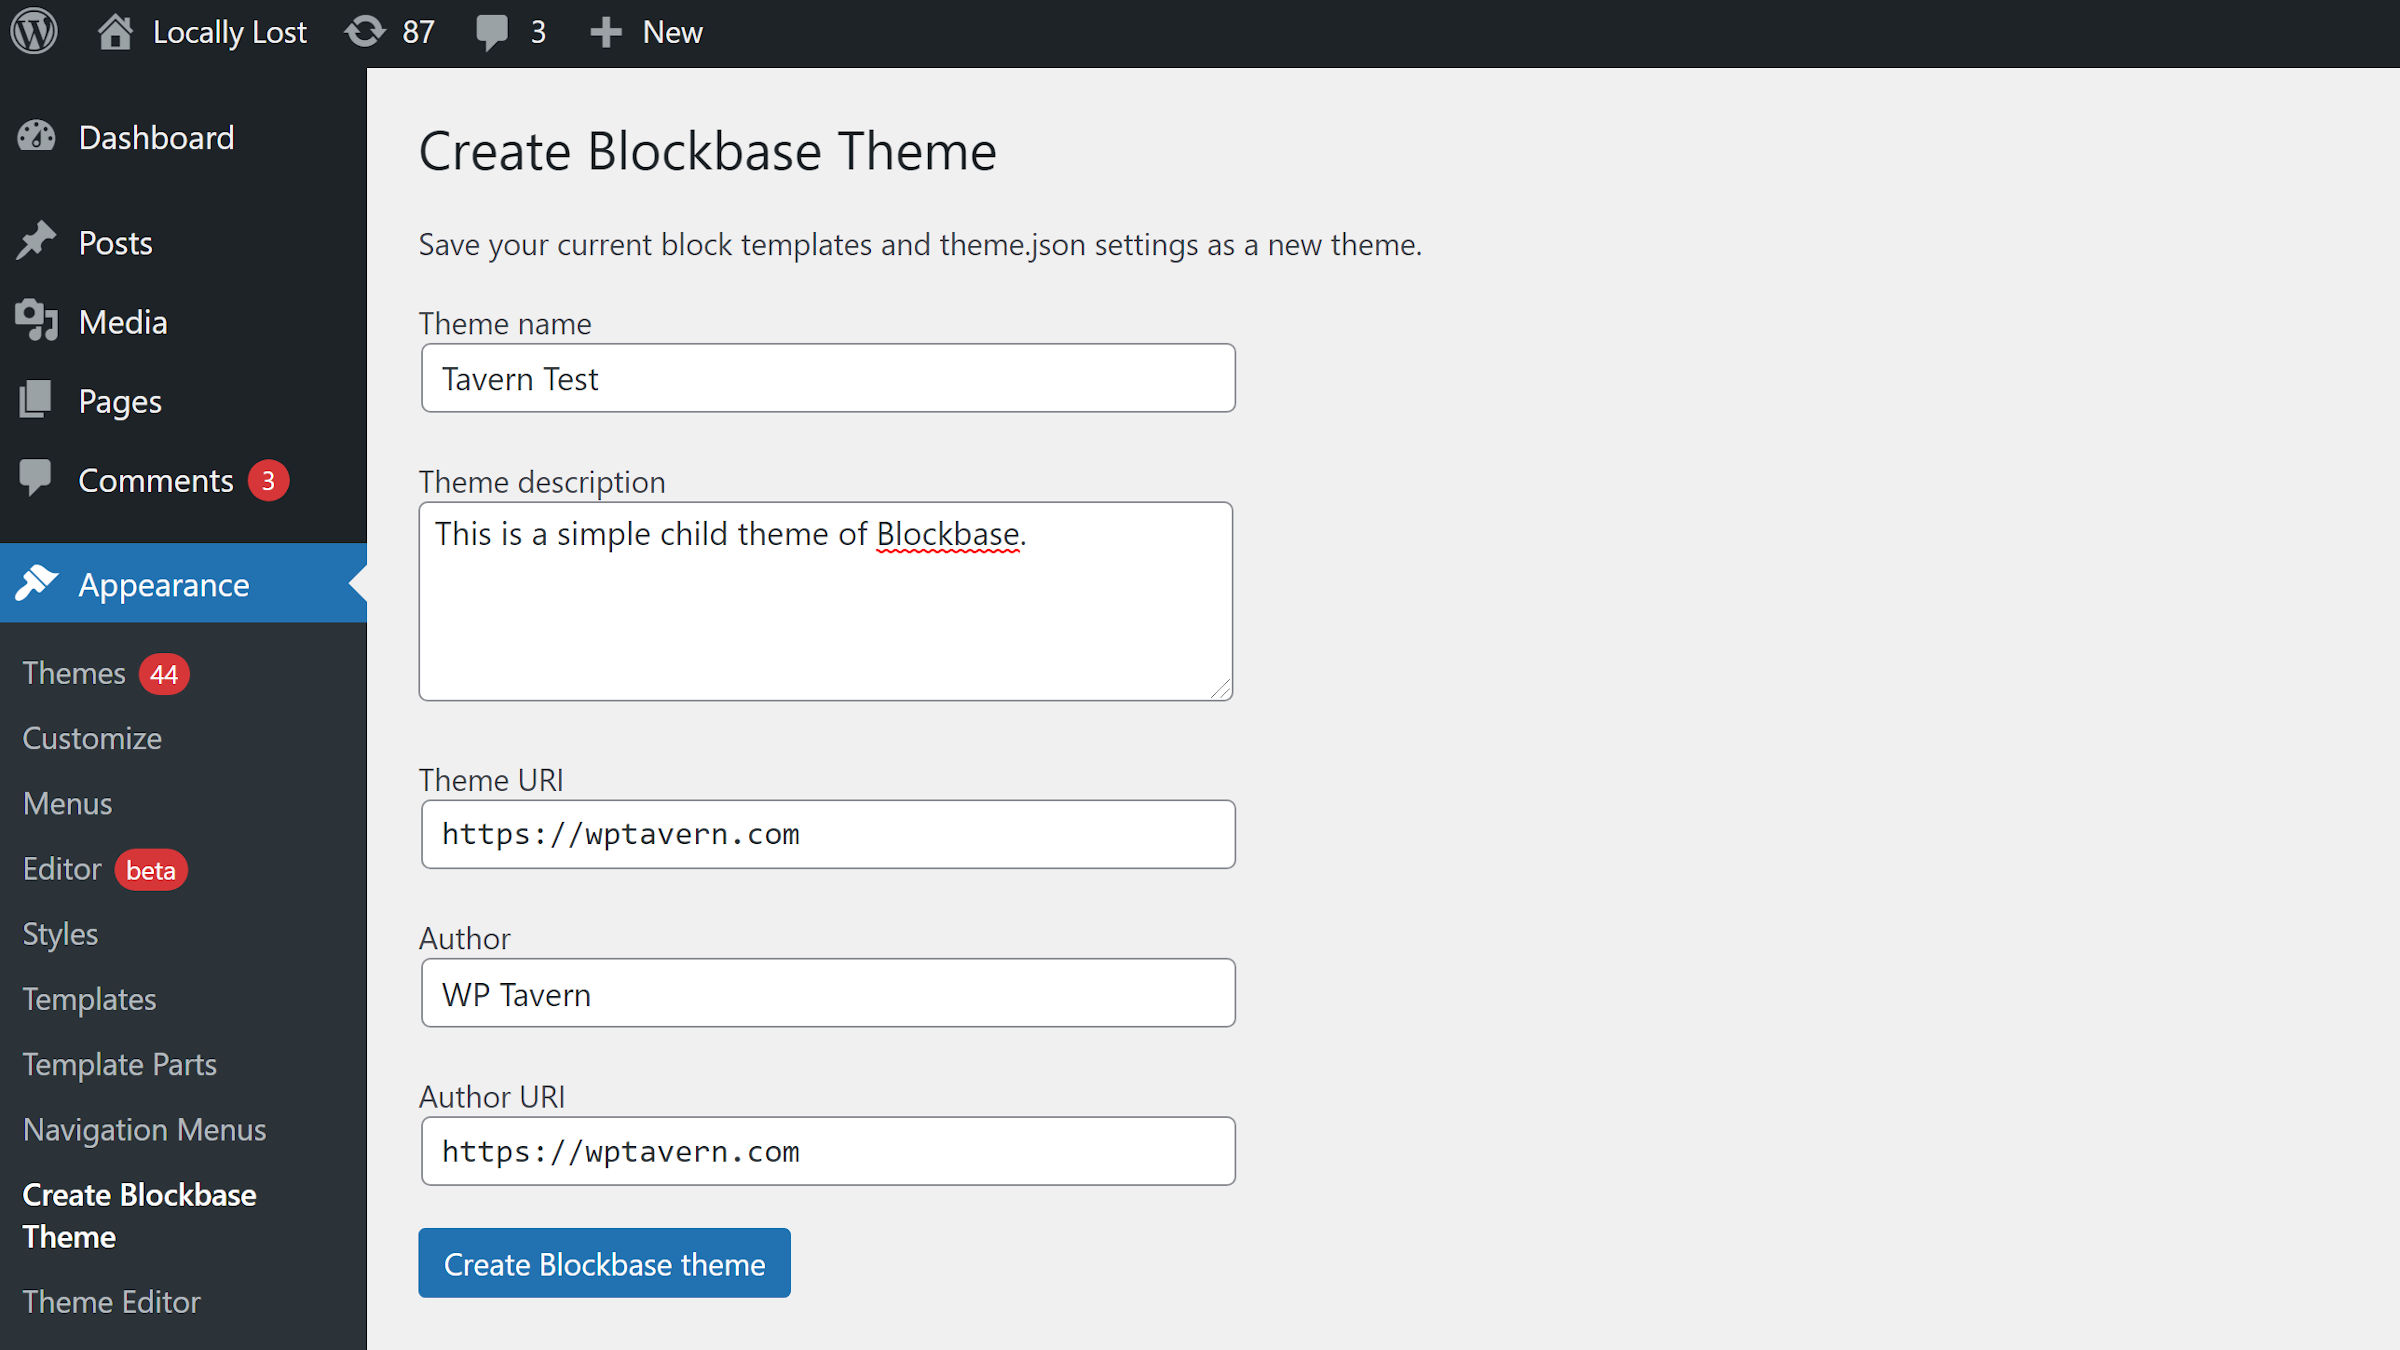 Plugin settings screen with theme info fields for generating a Blockbase child theme.